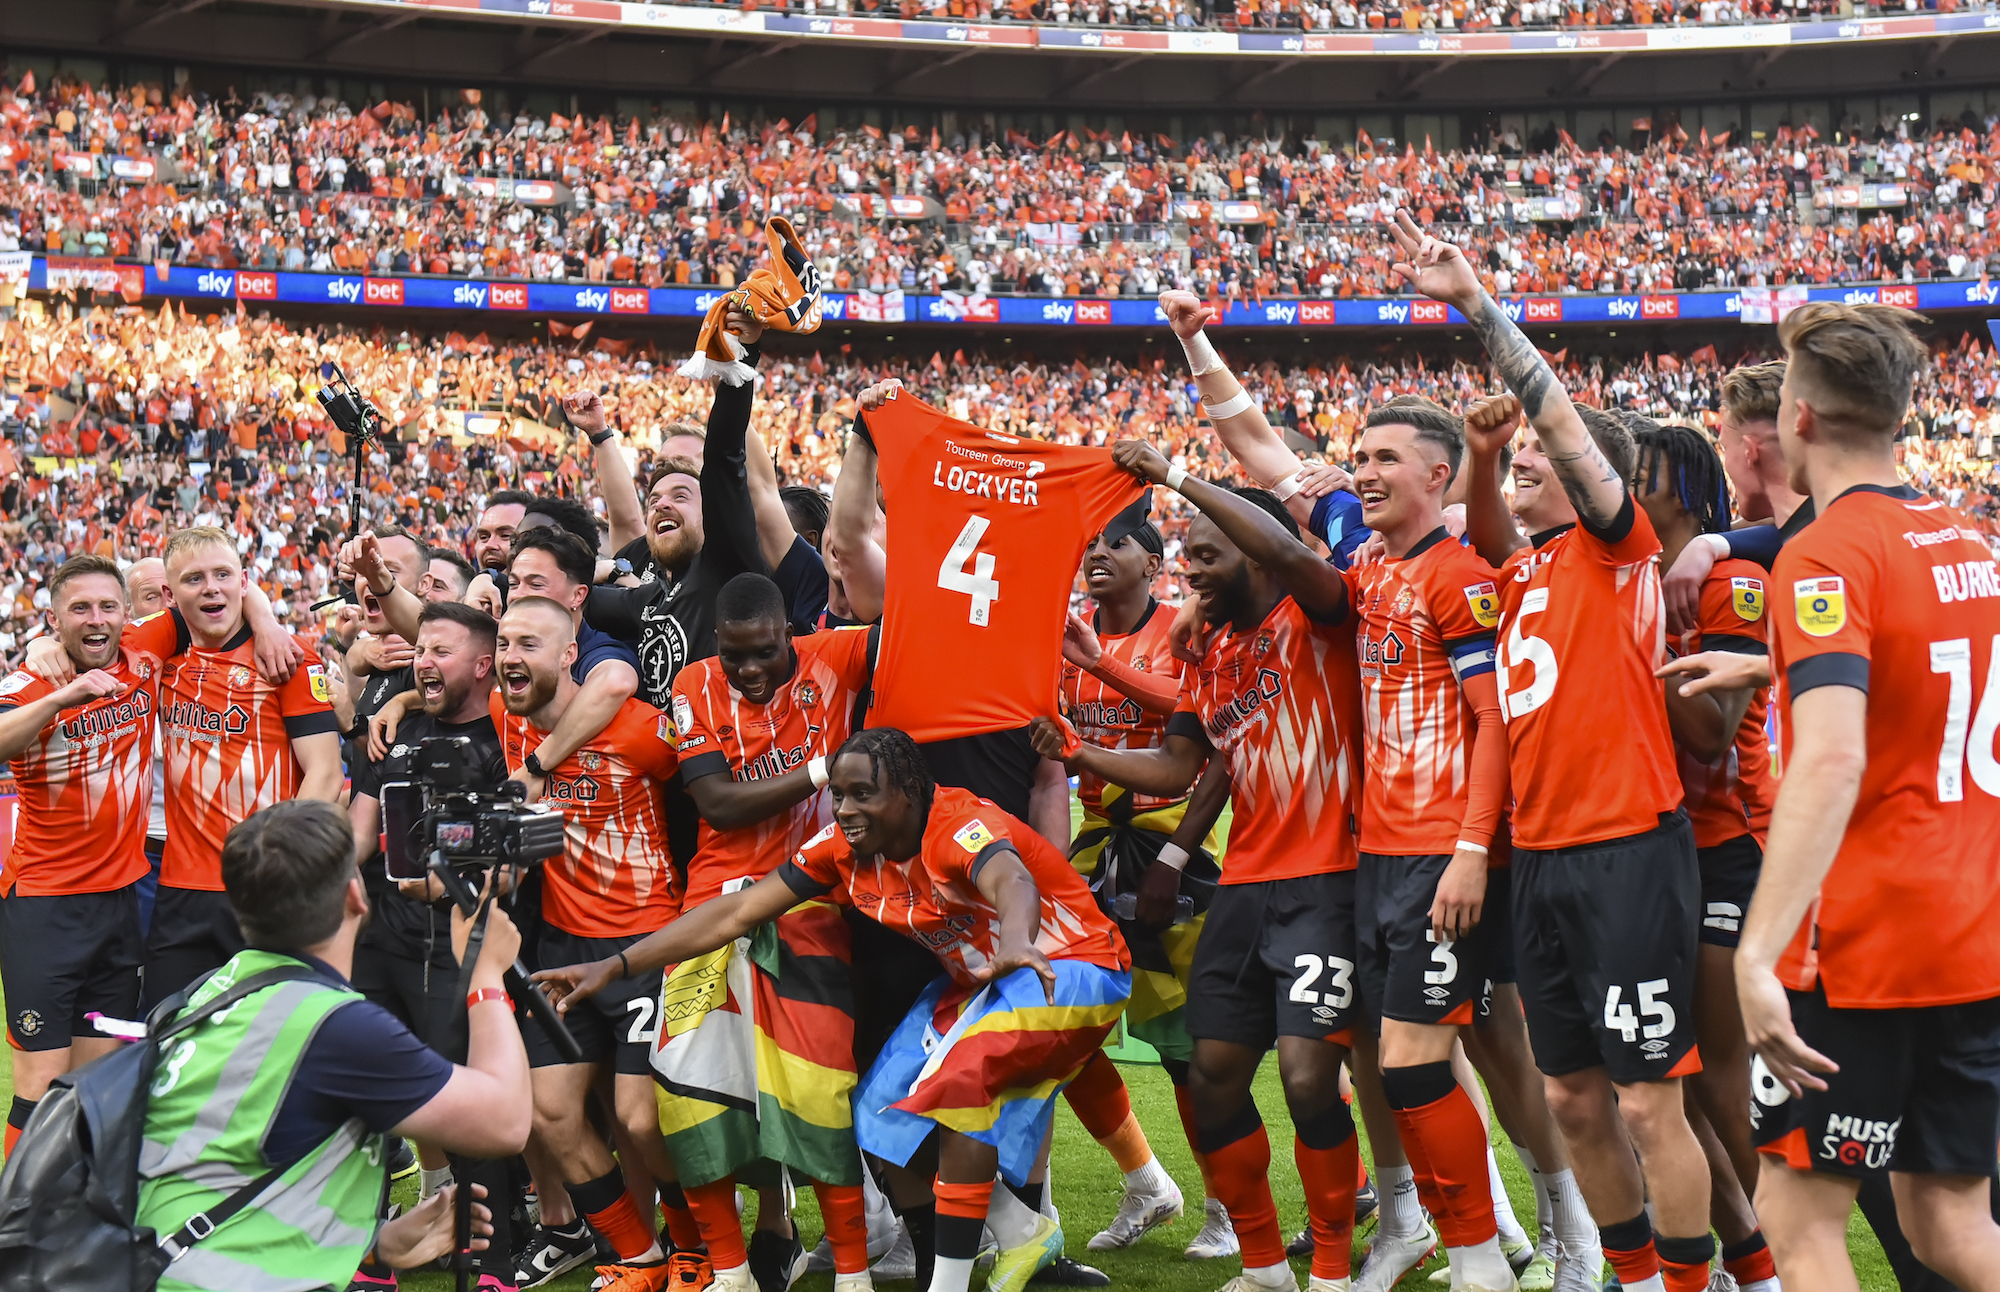 Luton Town players celebrating with Tom Lockyer shirt after winning the game during the Sky Bet Championship Play-Off Final between Coventry City and Luton Town at Wembley Stadium, London on Saturday 27th May 2023. (Photo by Ivan Yordanov/MI News/NurPhoto via Getty Images)